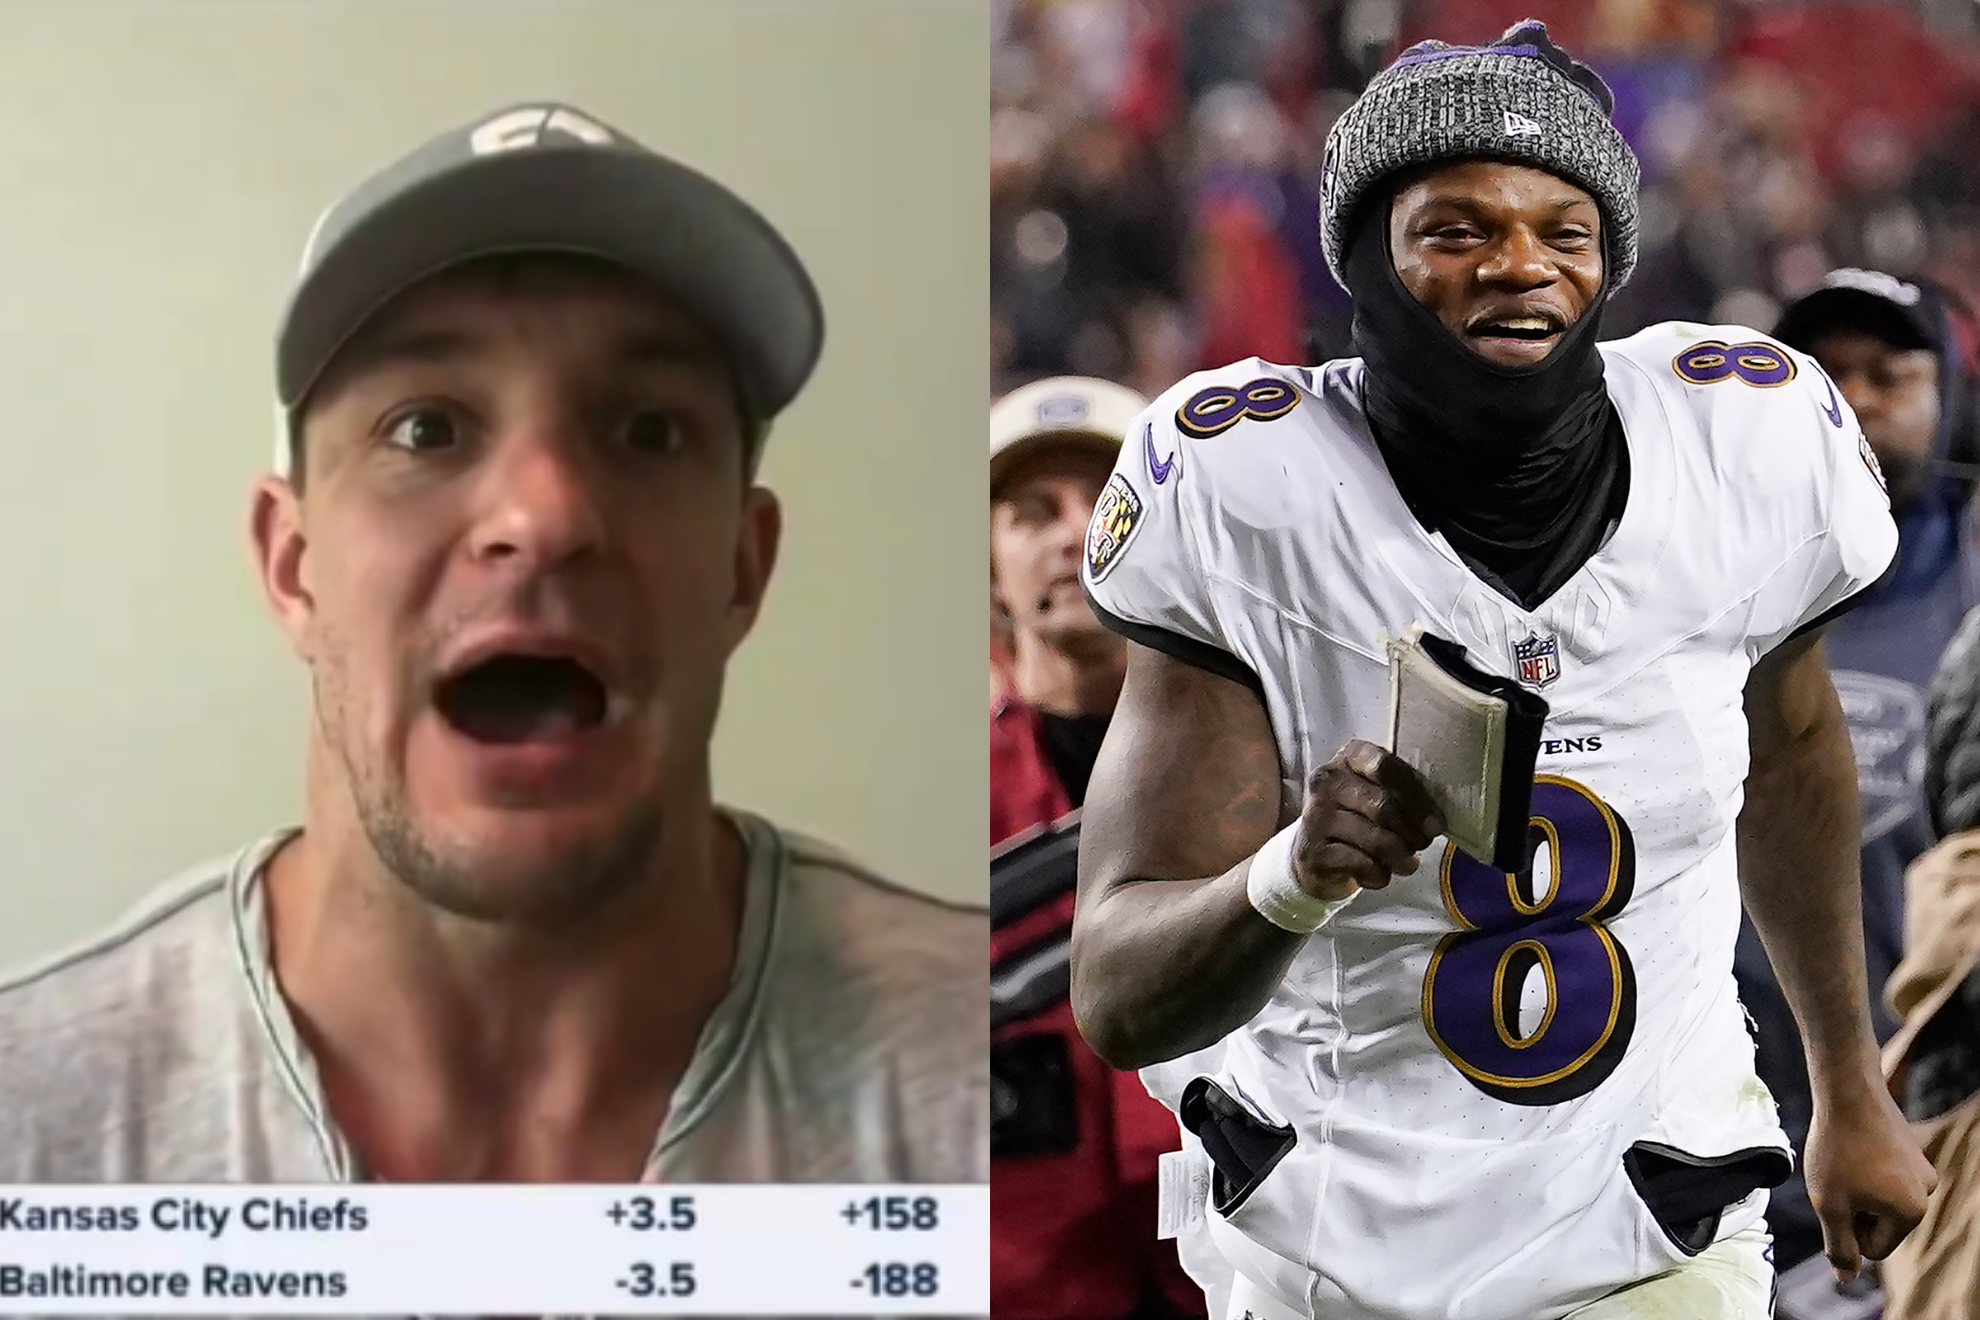 Gronkowski thinks Lamar Jackson and the Ravens will defeat Patrick Mahmoes and the Chiefs.